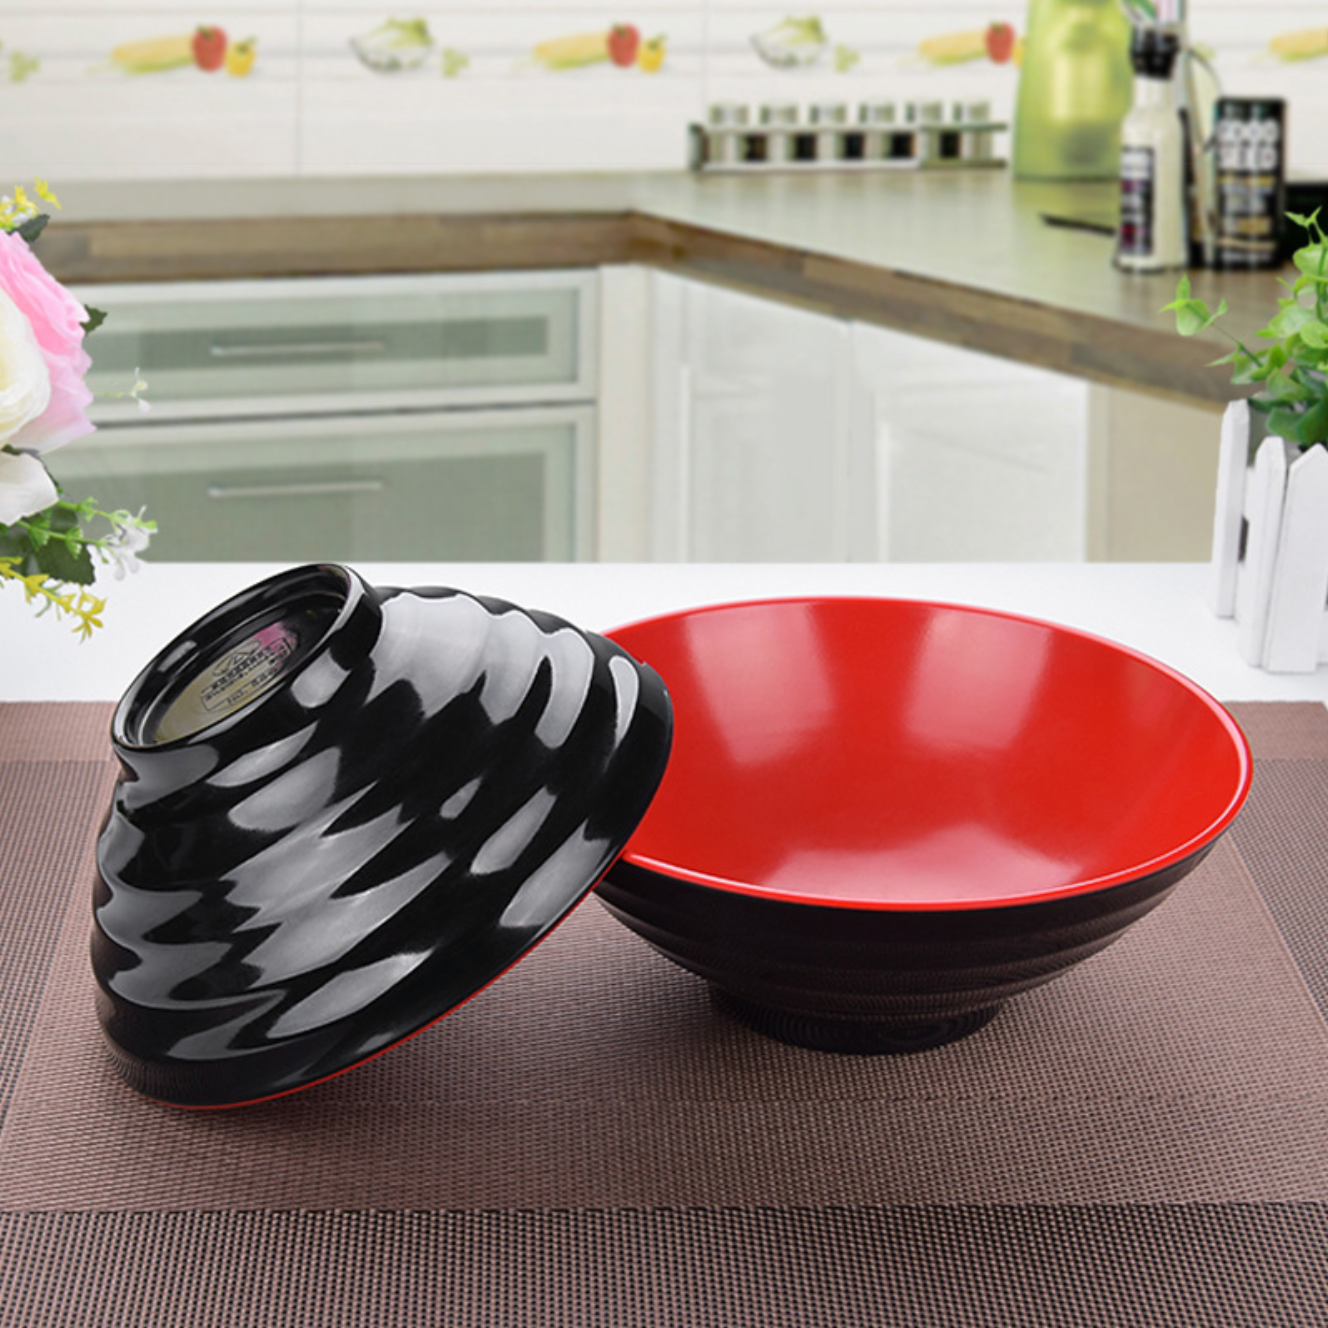 Versatile Red Melamine Ramen Bowl – 19.7cm Japanese-Style Noodle Soup Dish with Durable, Restaurant-Grade Construction for Home & Commercial Use